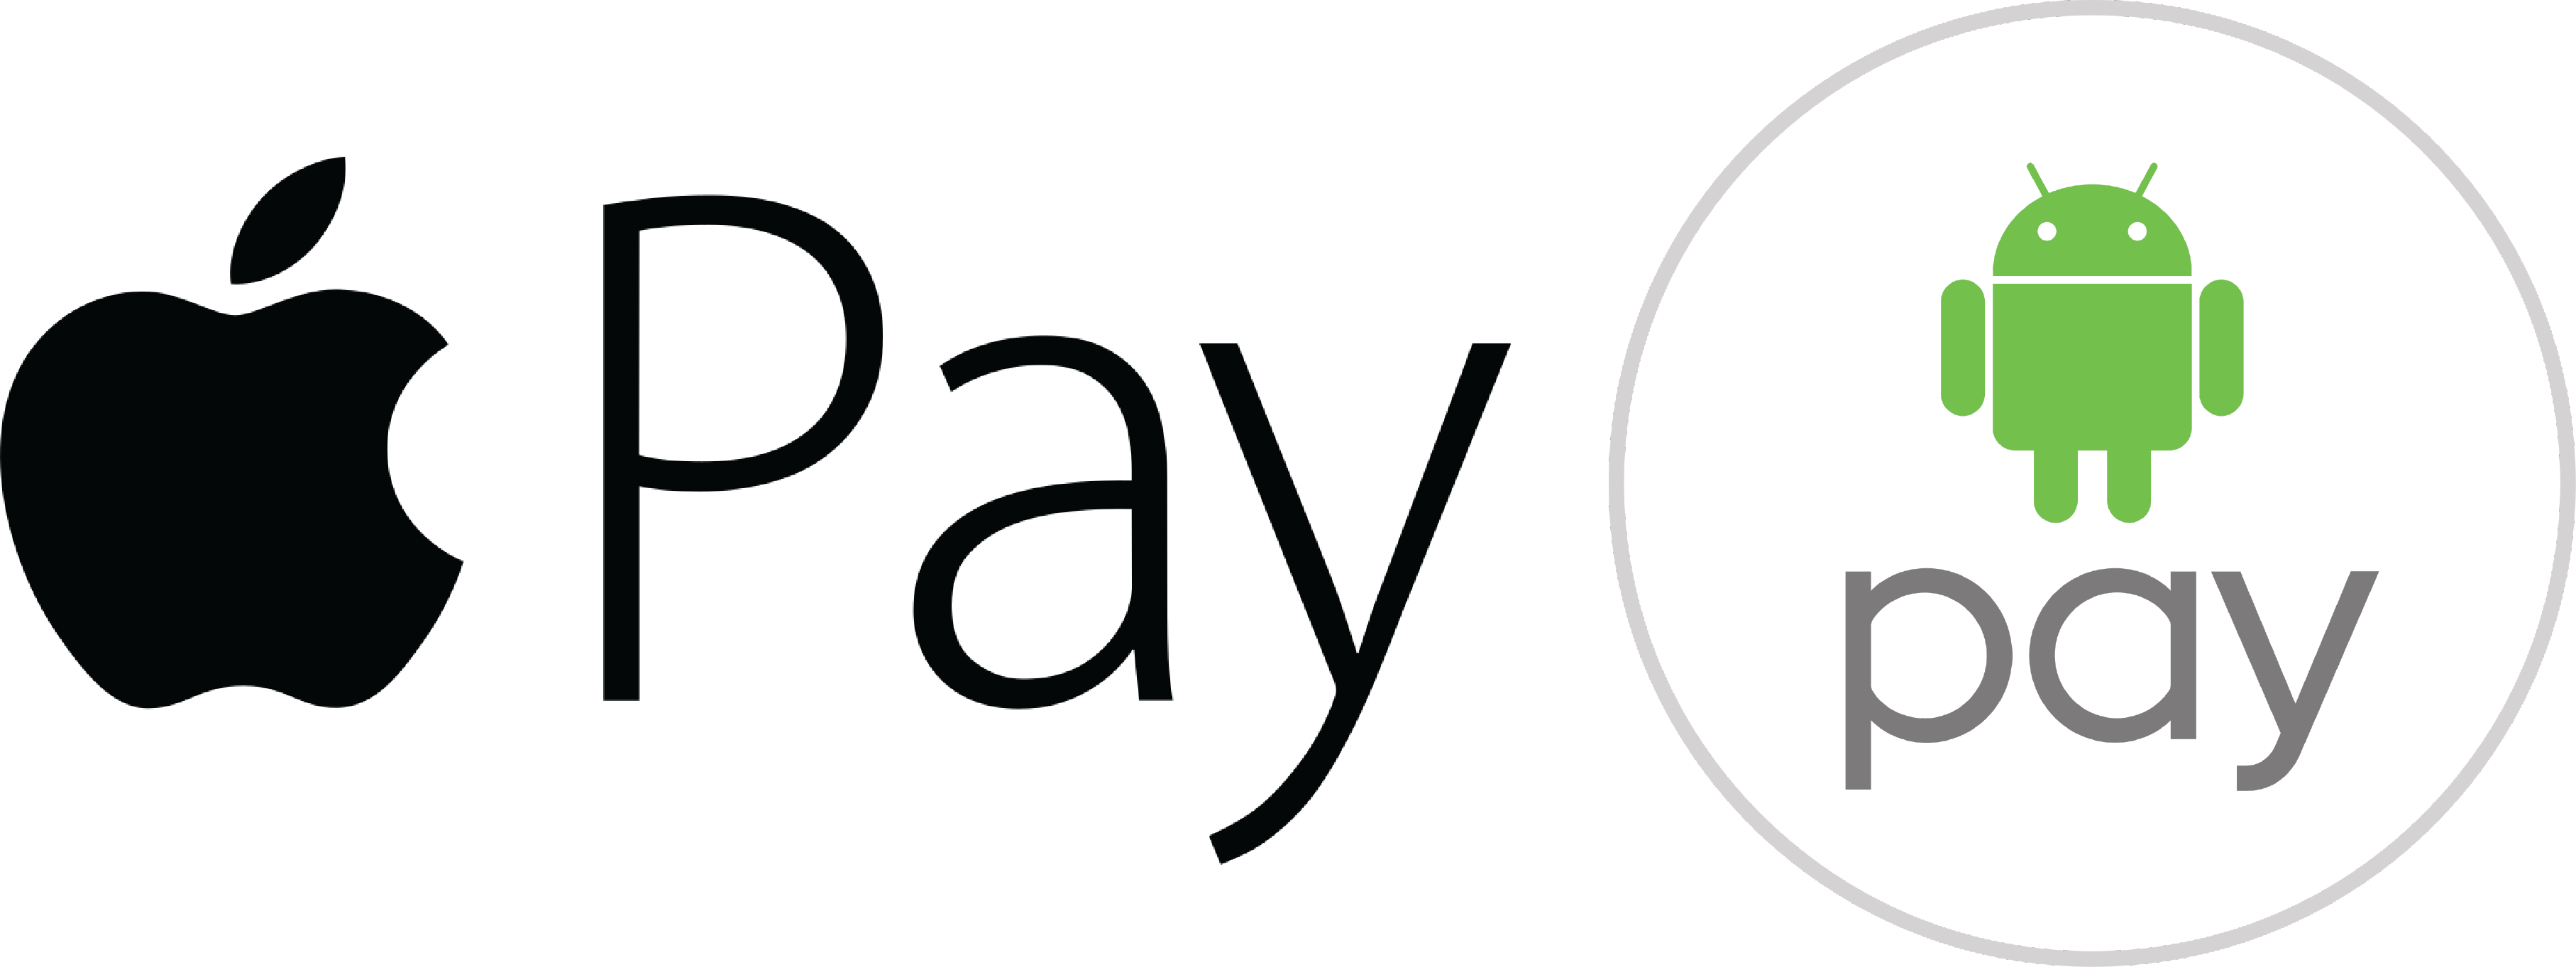 Apple Pay - Android Pay (3630x1363)